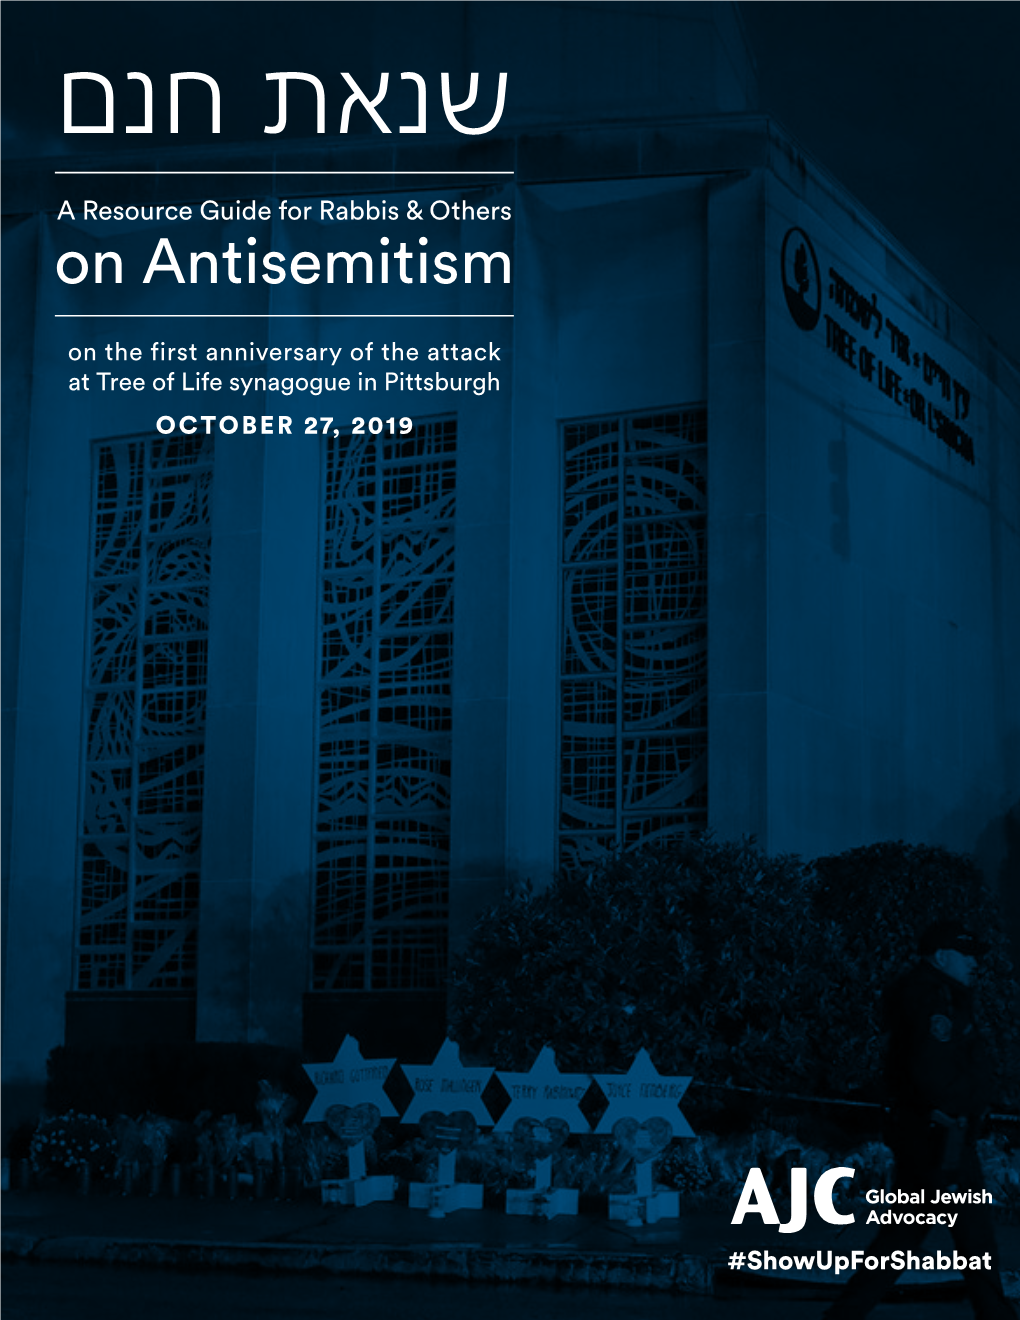 A Resource Guide for Rabbis & Others on Antisemitism